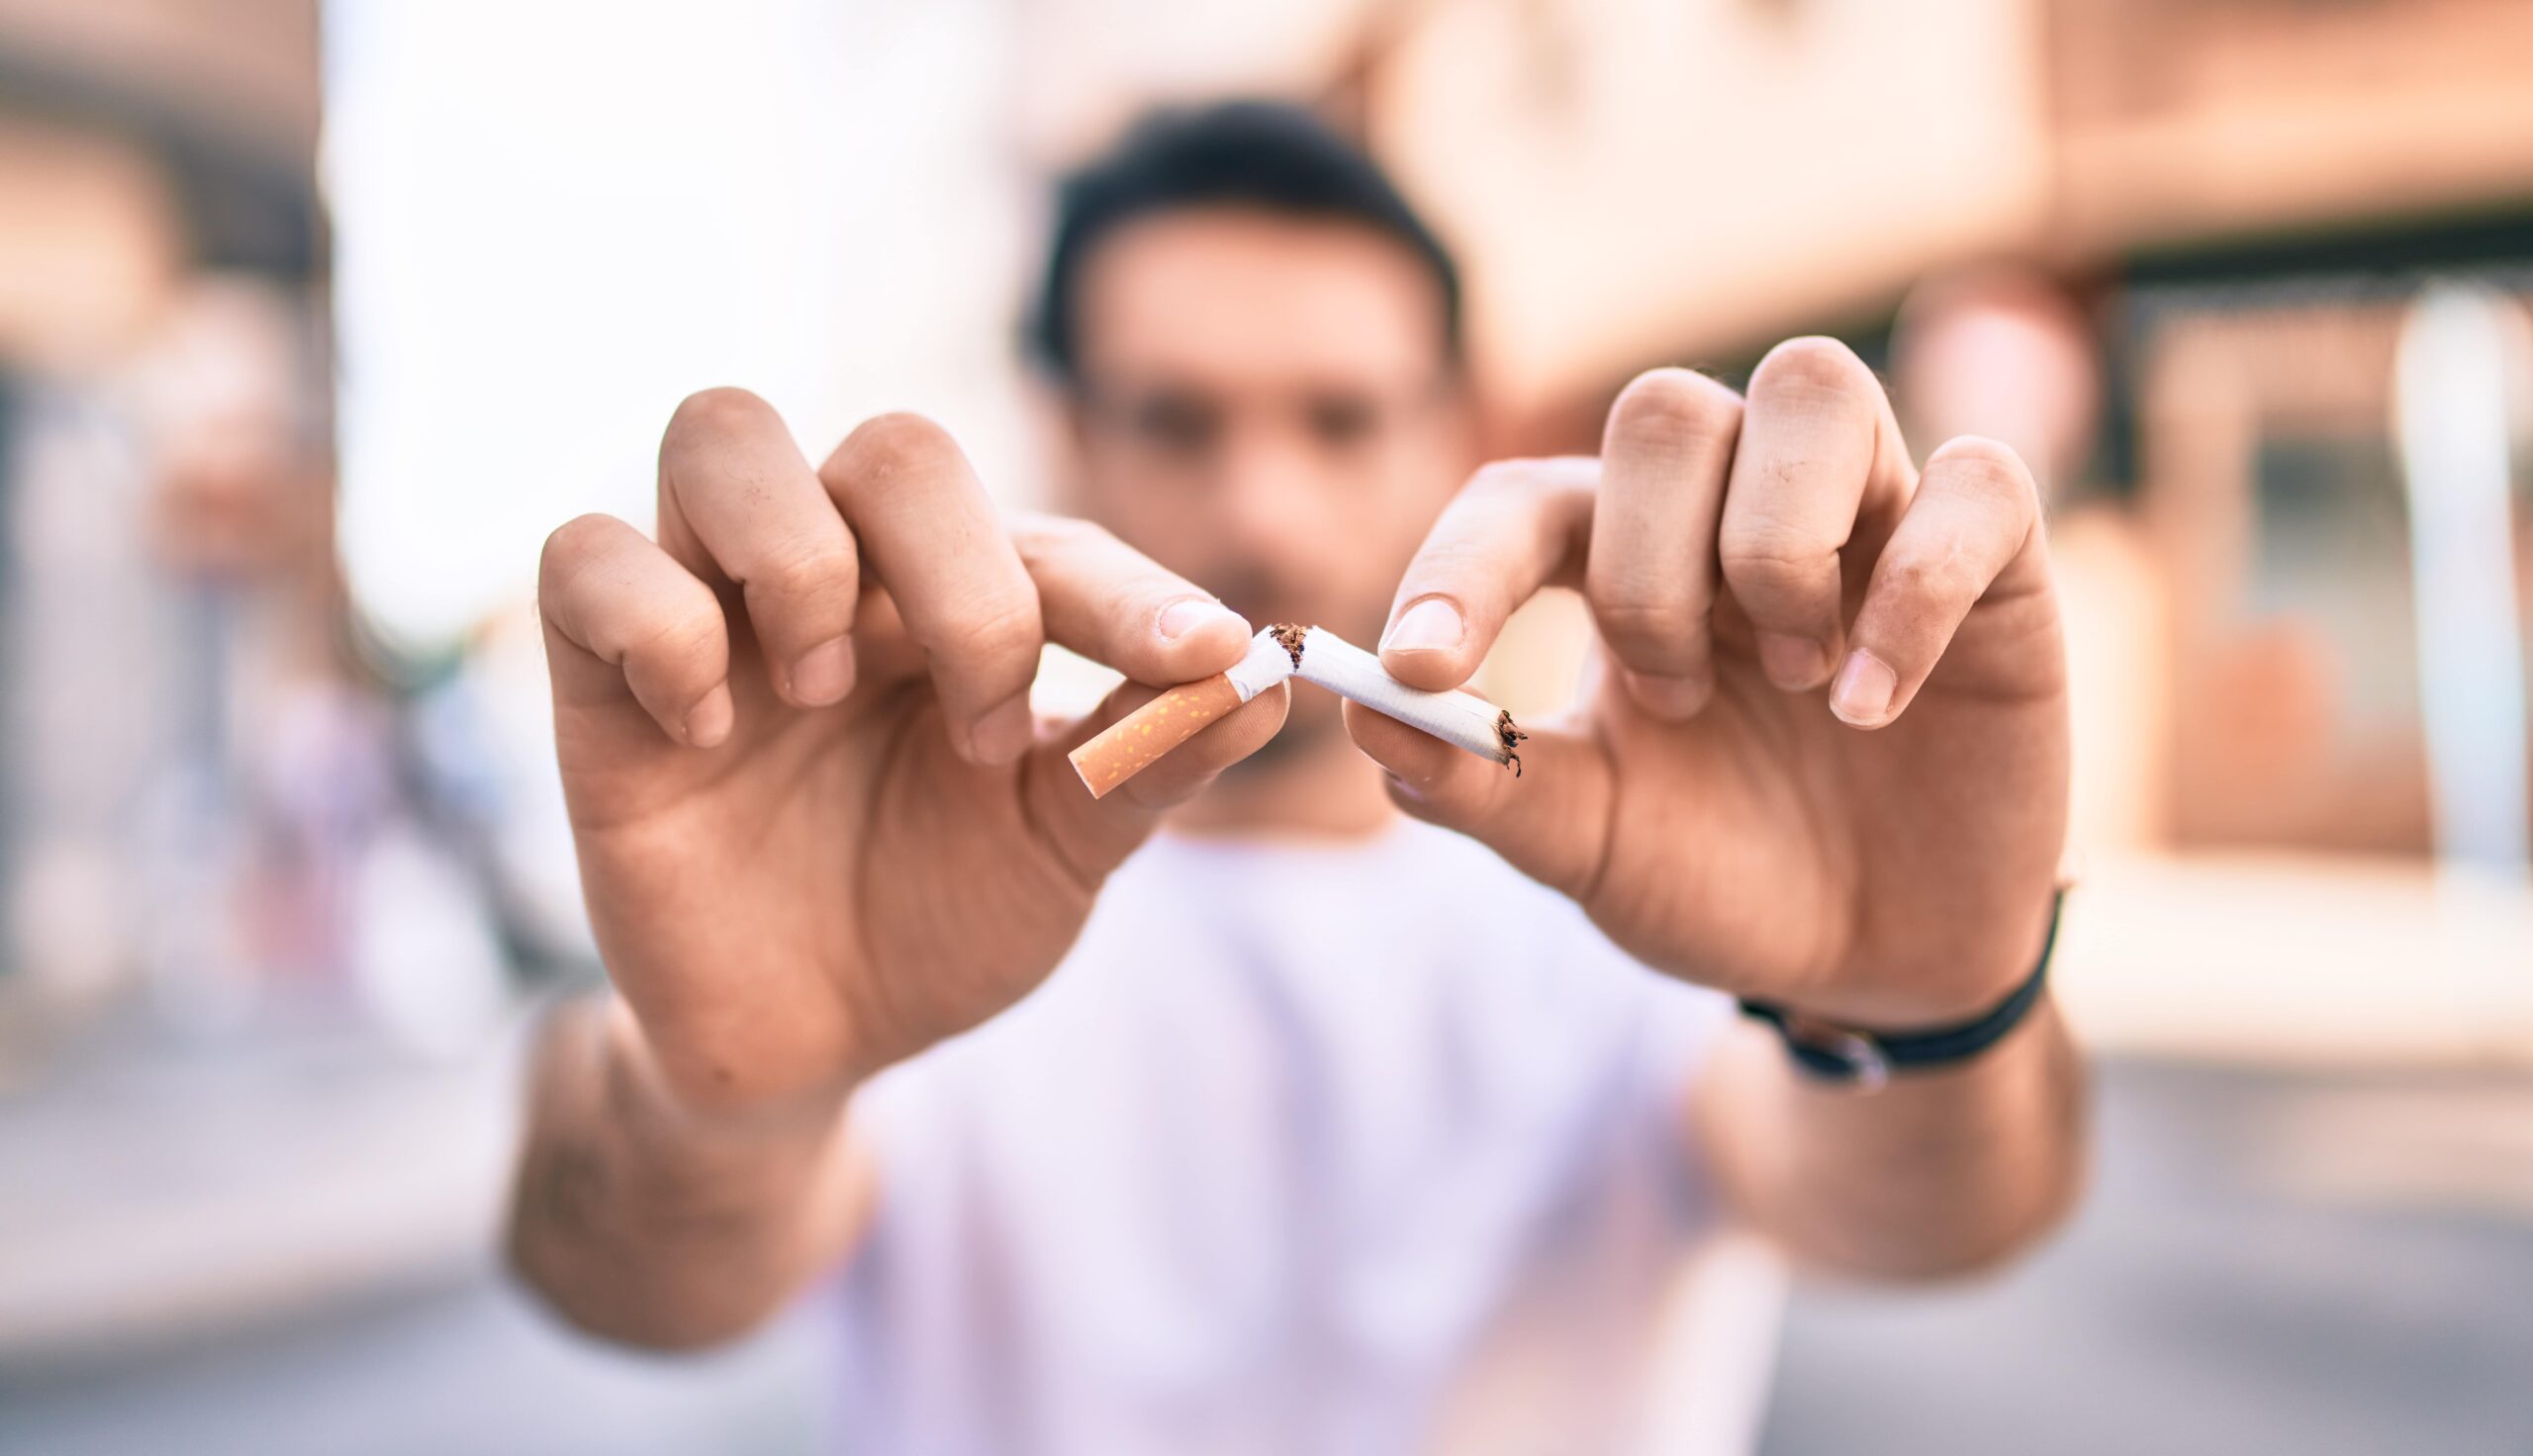 Health campaigners welcome King’s Speech hailing a smokefree generation